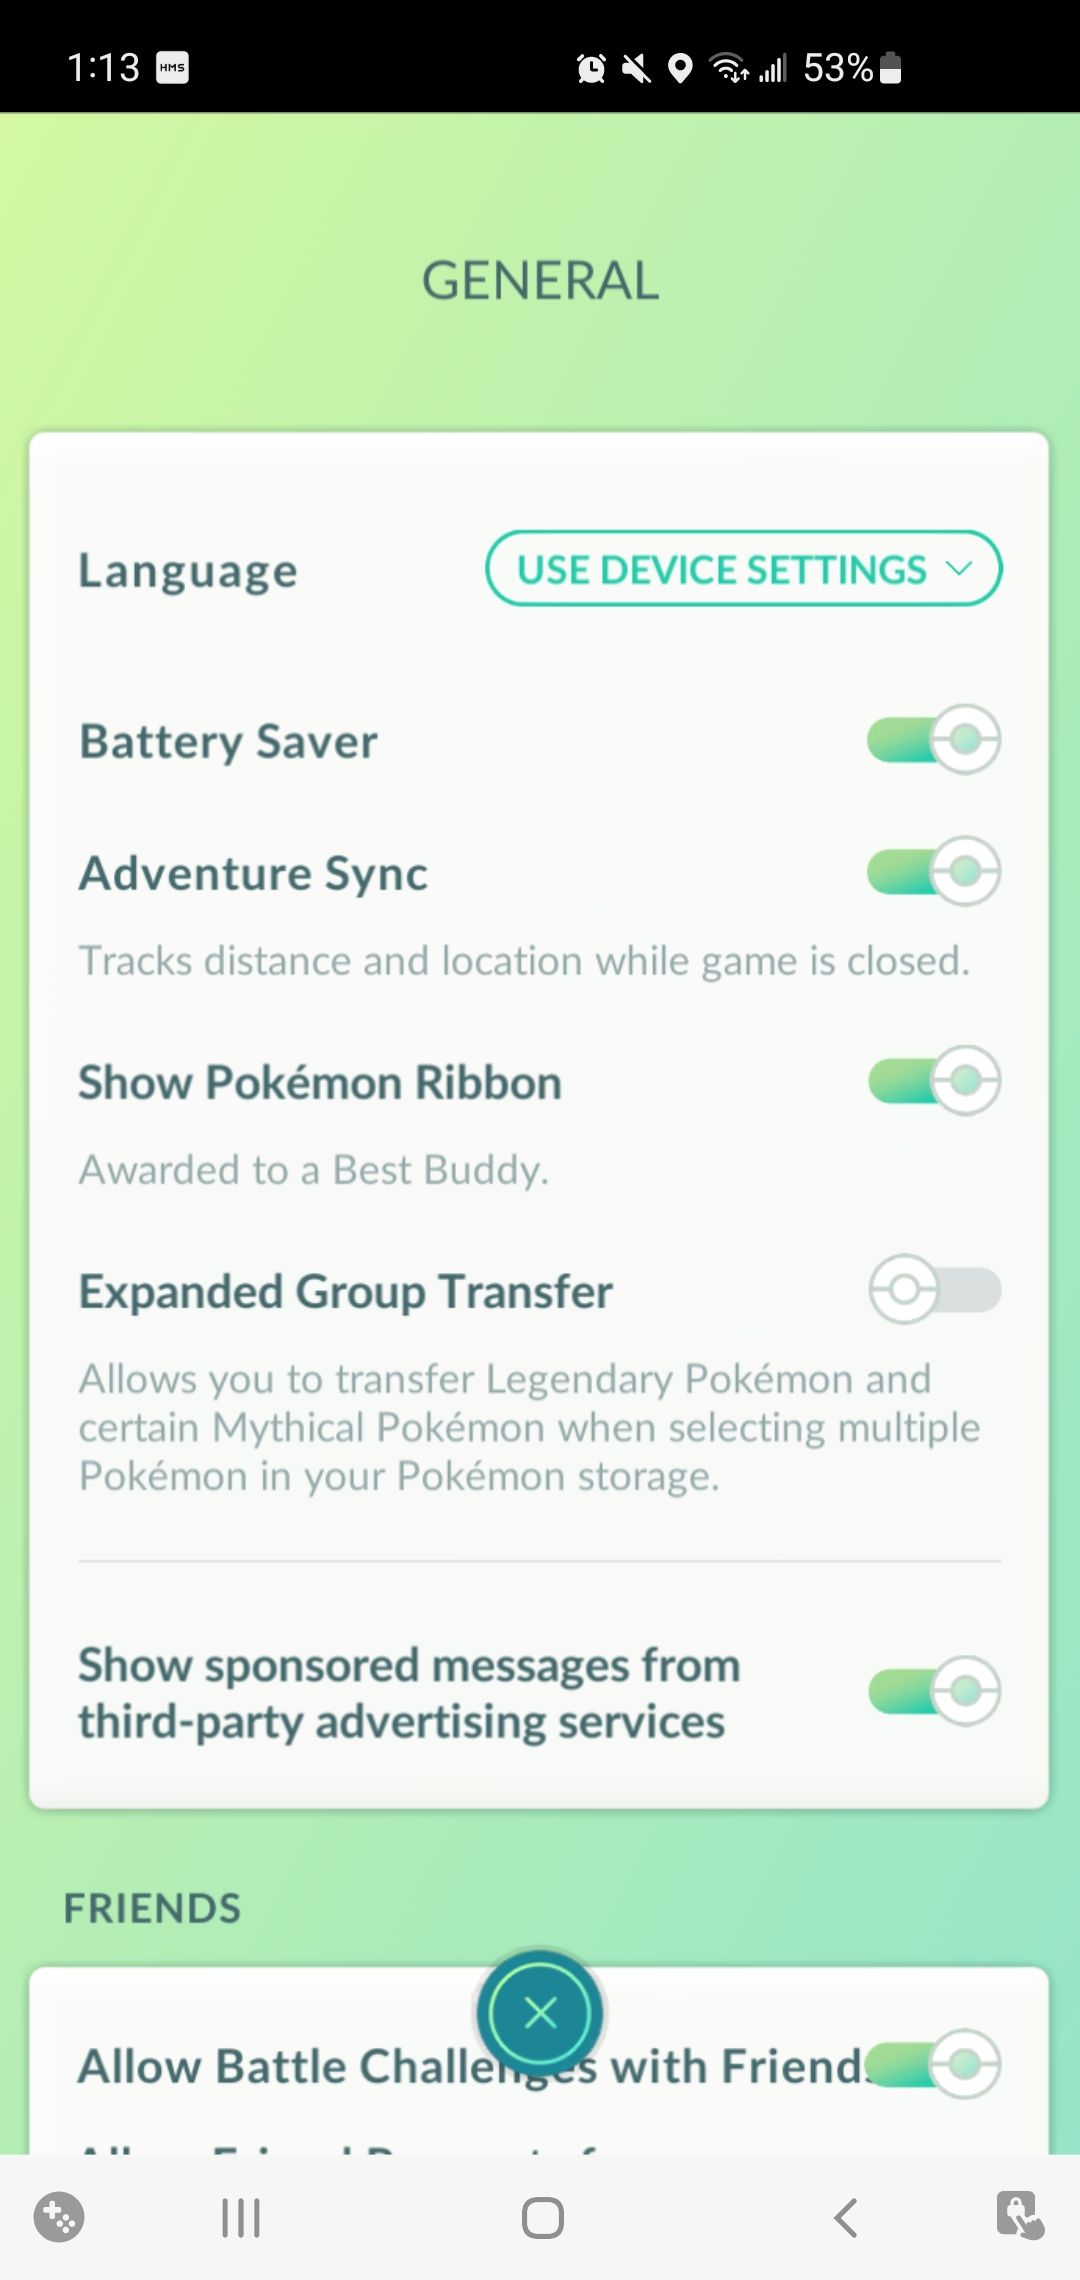 general settings in pokemon go with toggles